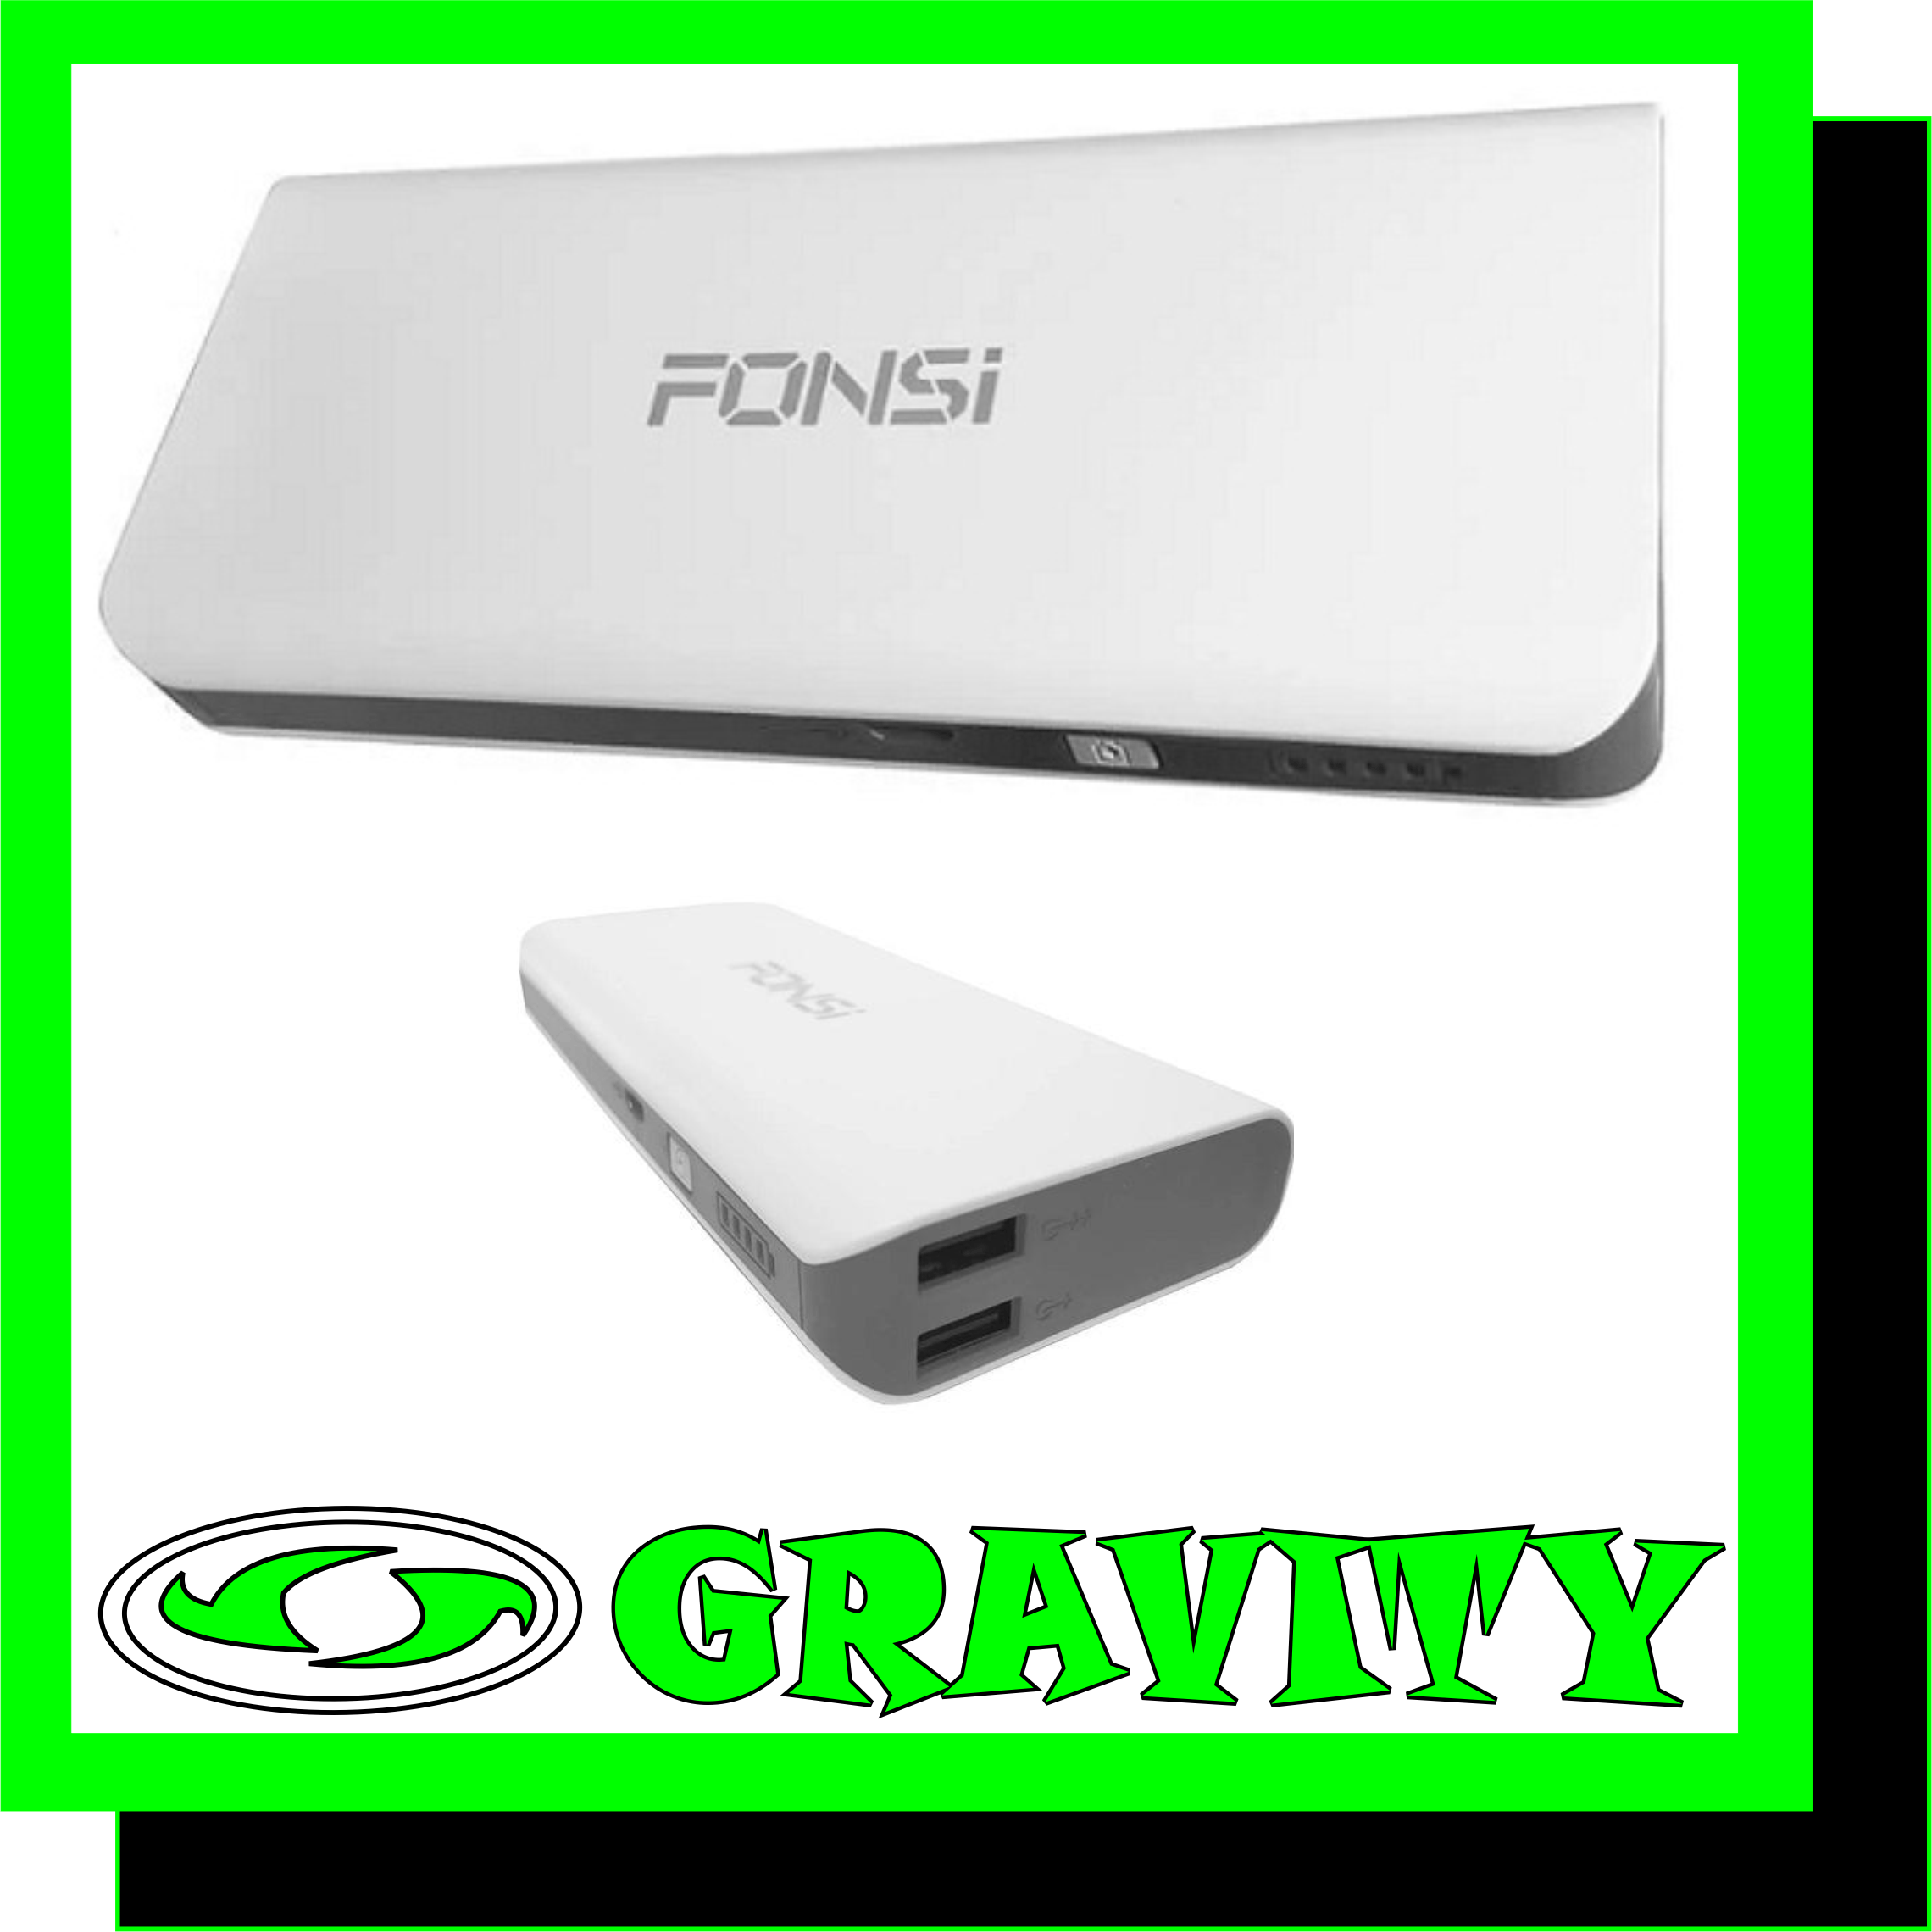 The Power bank 15 000 mAh is perfect for charging your smartphone or devices on the go or when extra battery power is needed.  Features: - Stylish portable design. - Ergonomic arc design. - A- Grade lithium battery, safe. - Optimized charging efficiency - Intelligent IC circuit management.  Specifications: - Capacity: 15 000 mAh - Suitable for nearly all kinds of mobile phones and digital devices which have USB cable